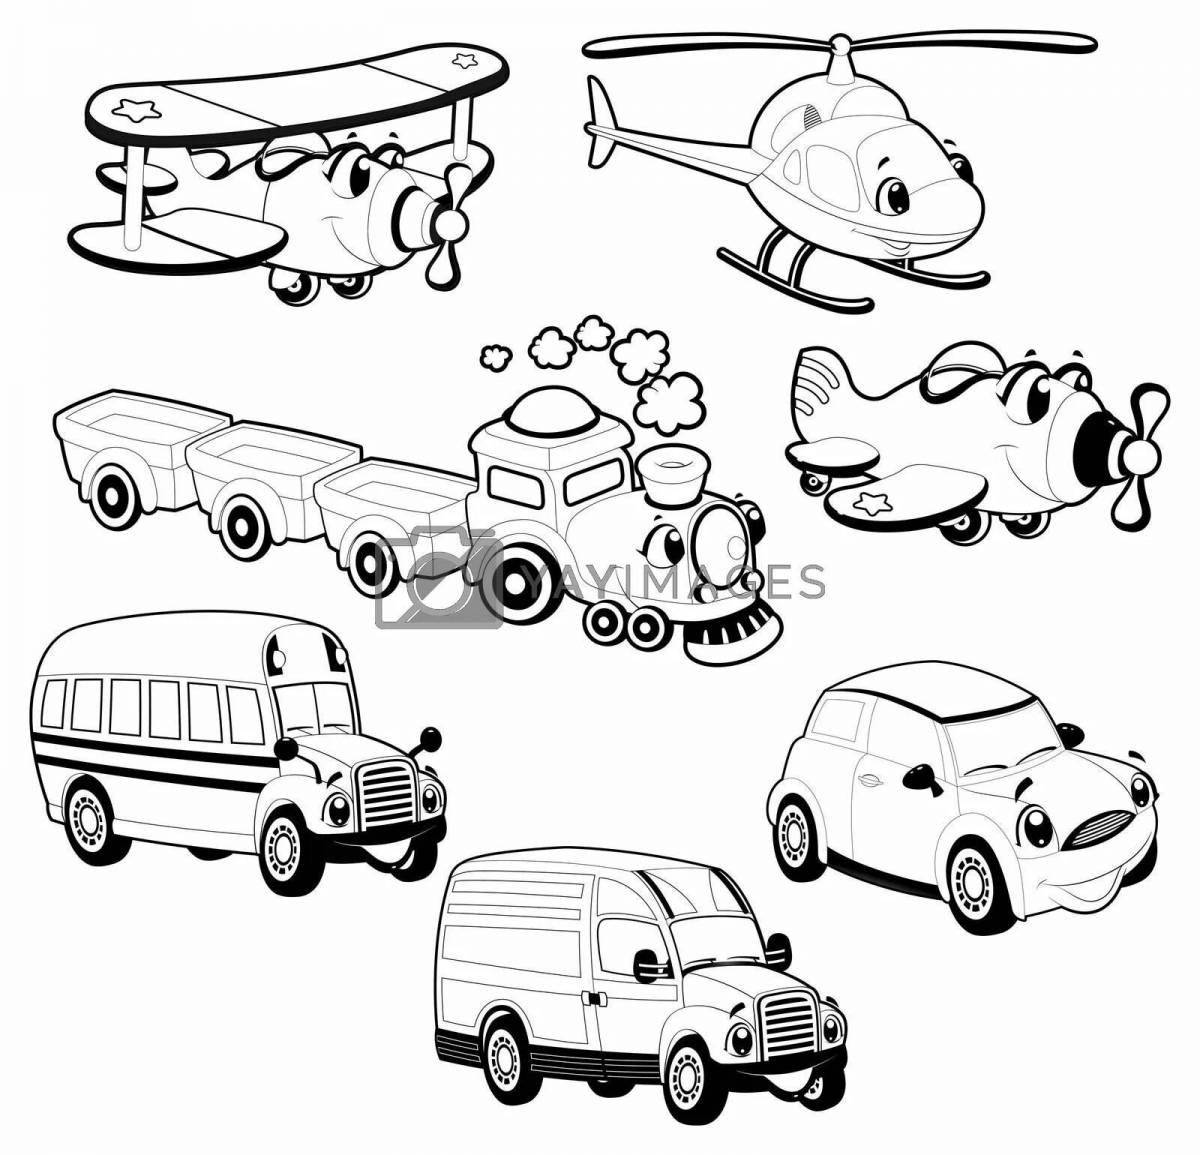 Colorful cars coloring book